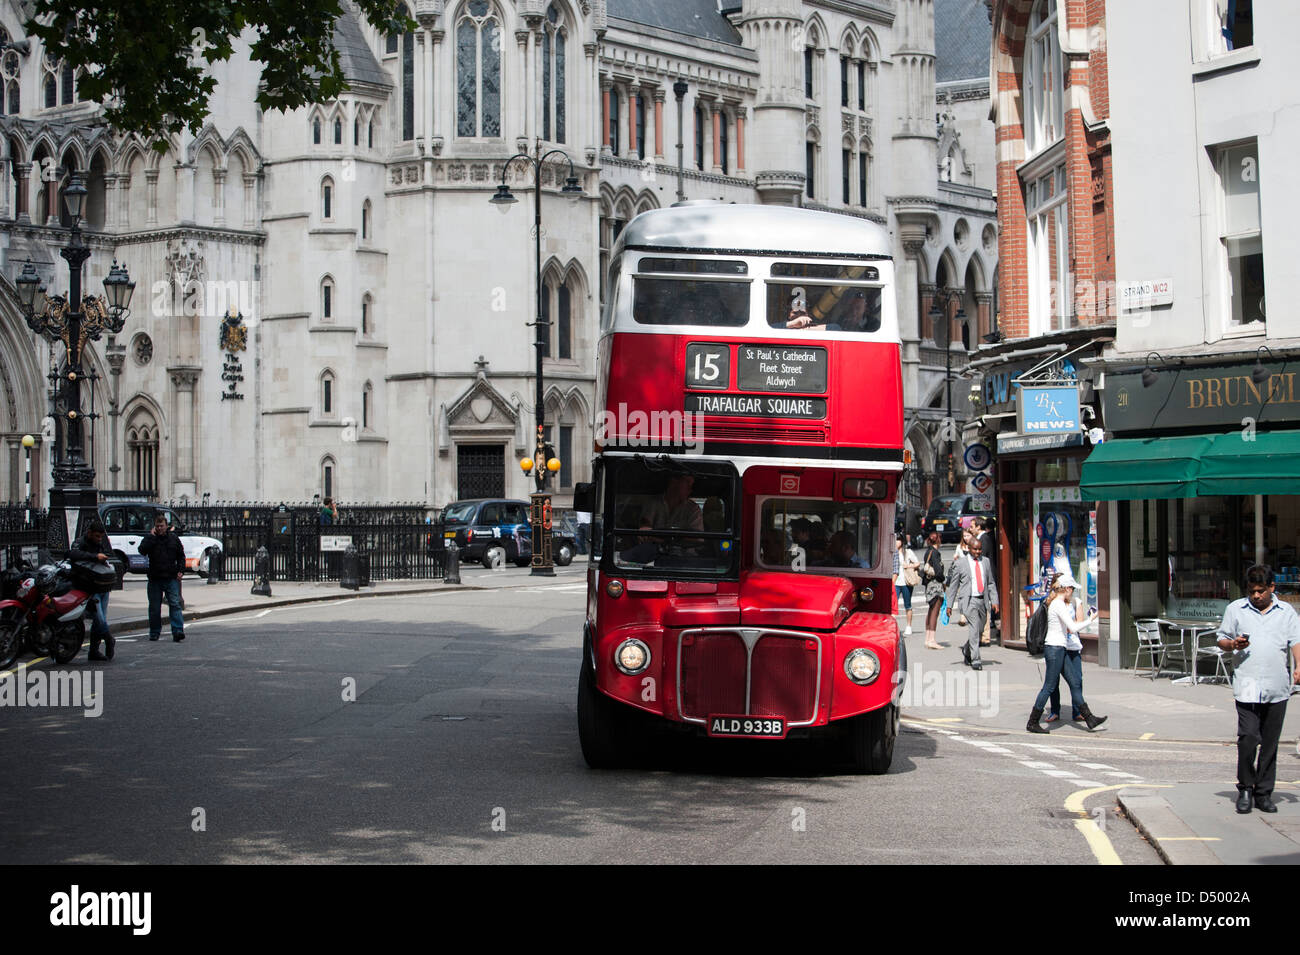 Traditionelle Londoner Routemaster Bus am Aldwych, route 15, in der Nähe der Royal Courts of Justice, London Stockfoto